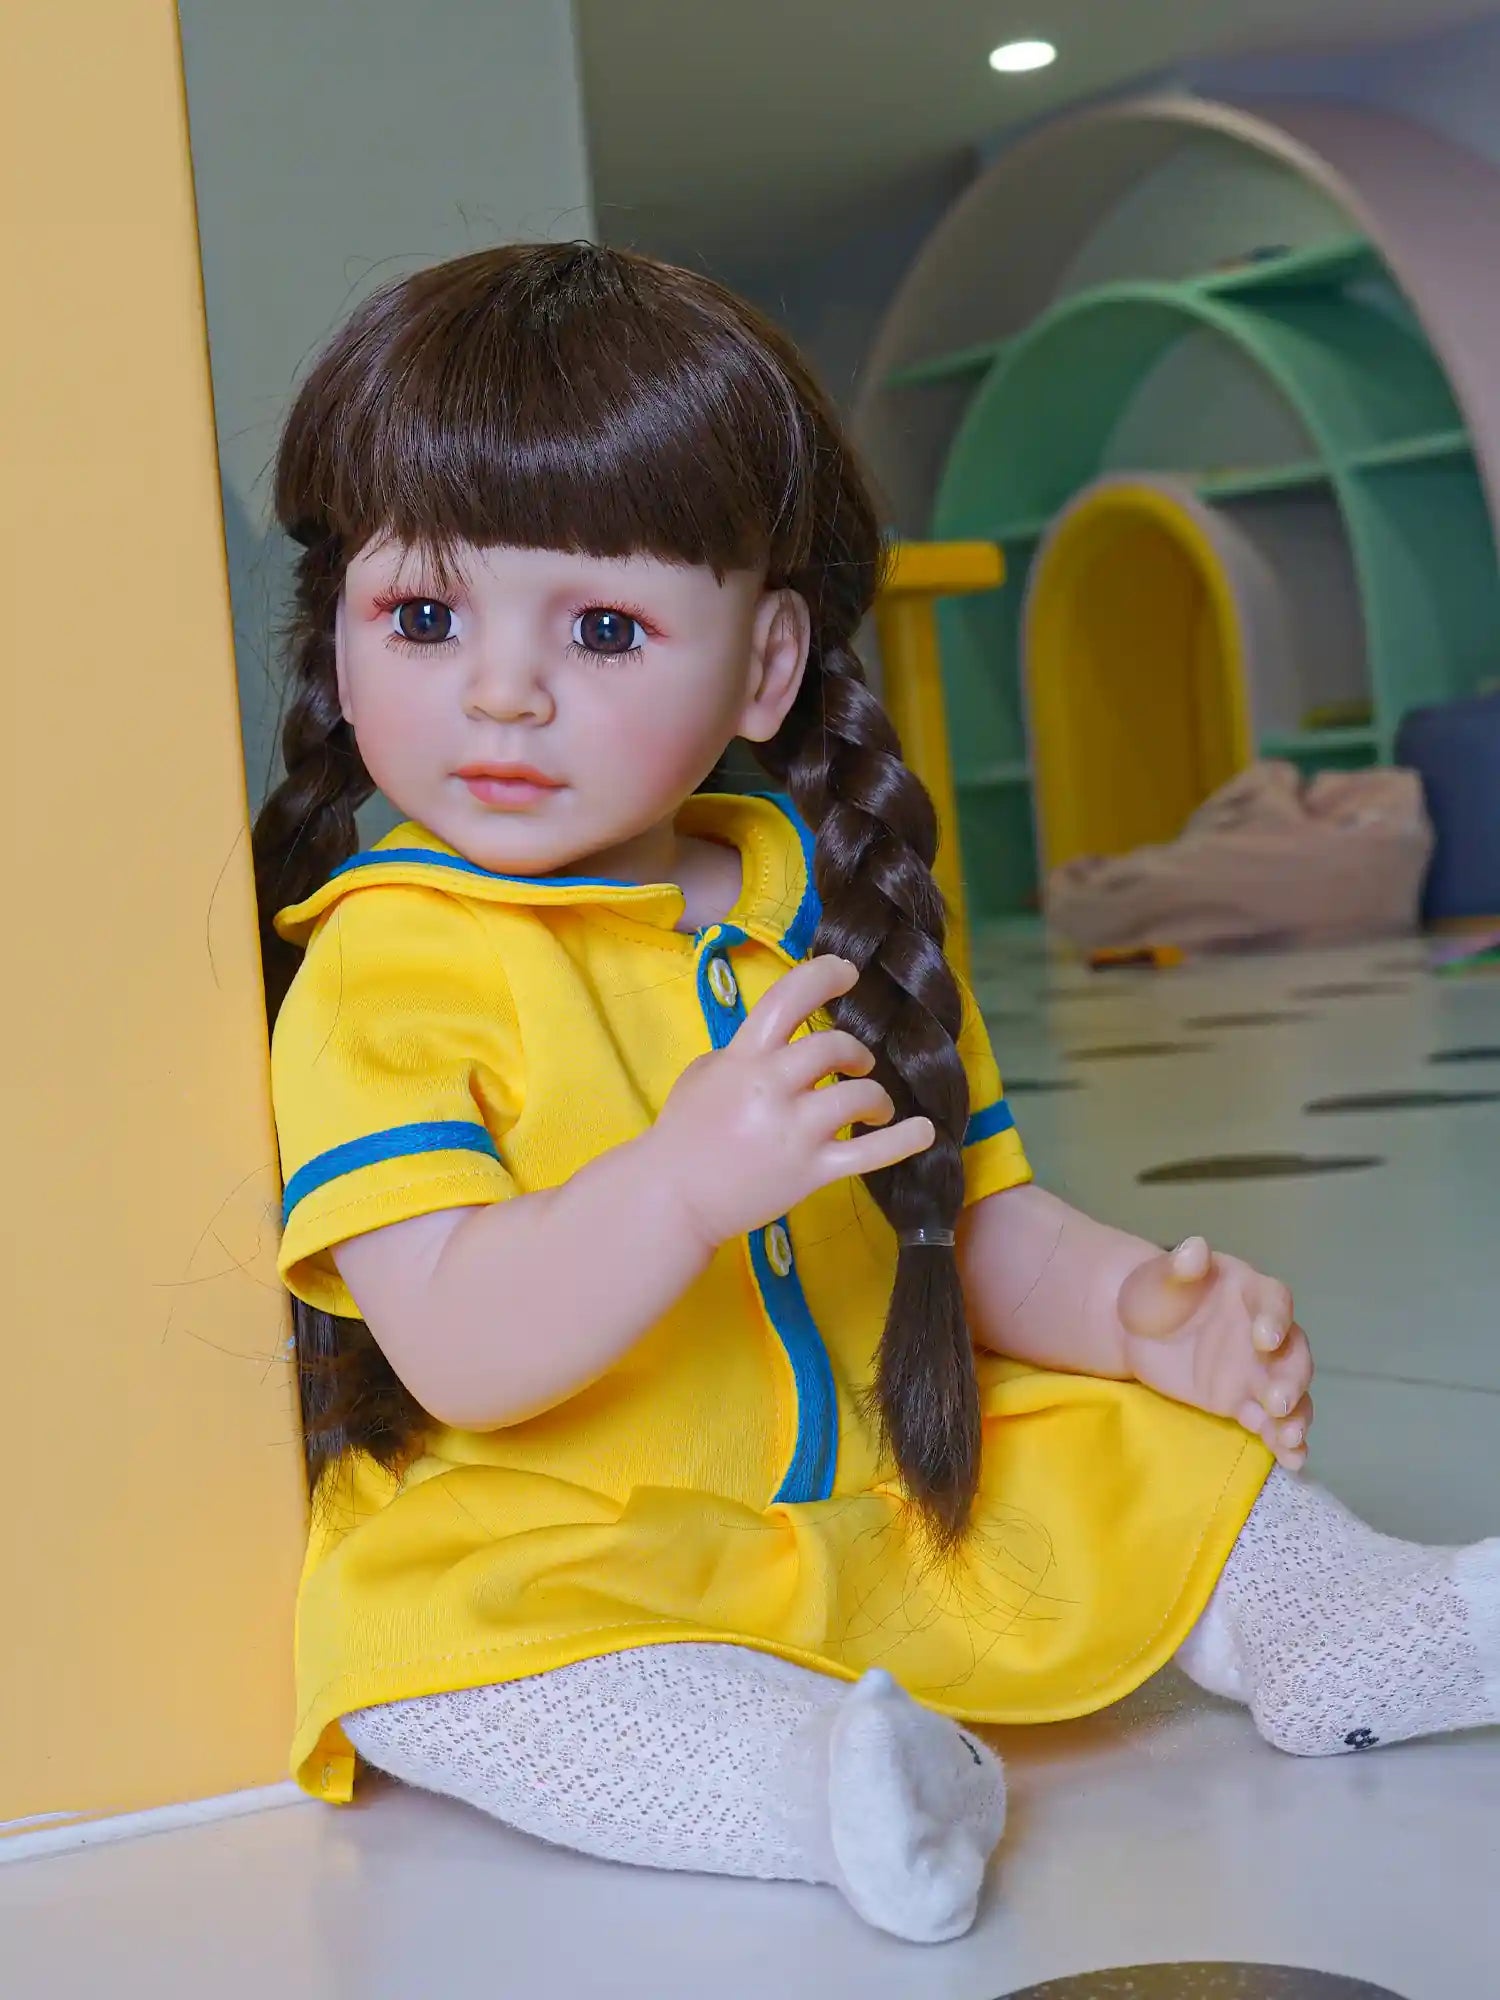 Toddler doll with braided dark hair and a blue-eyed gaze, wearing a bright yellow dress, seated in a playful nursery setting.